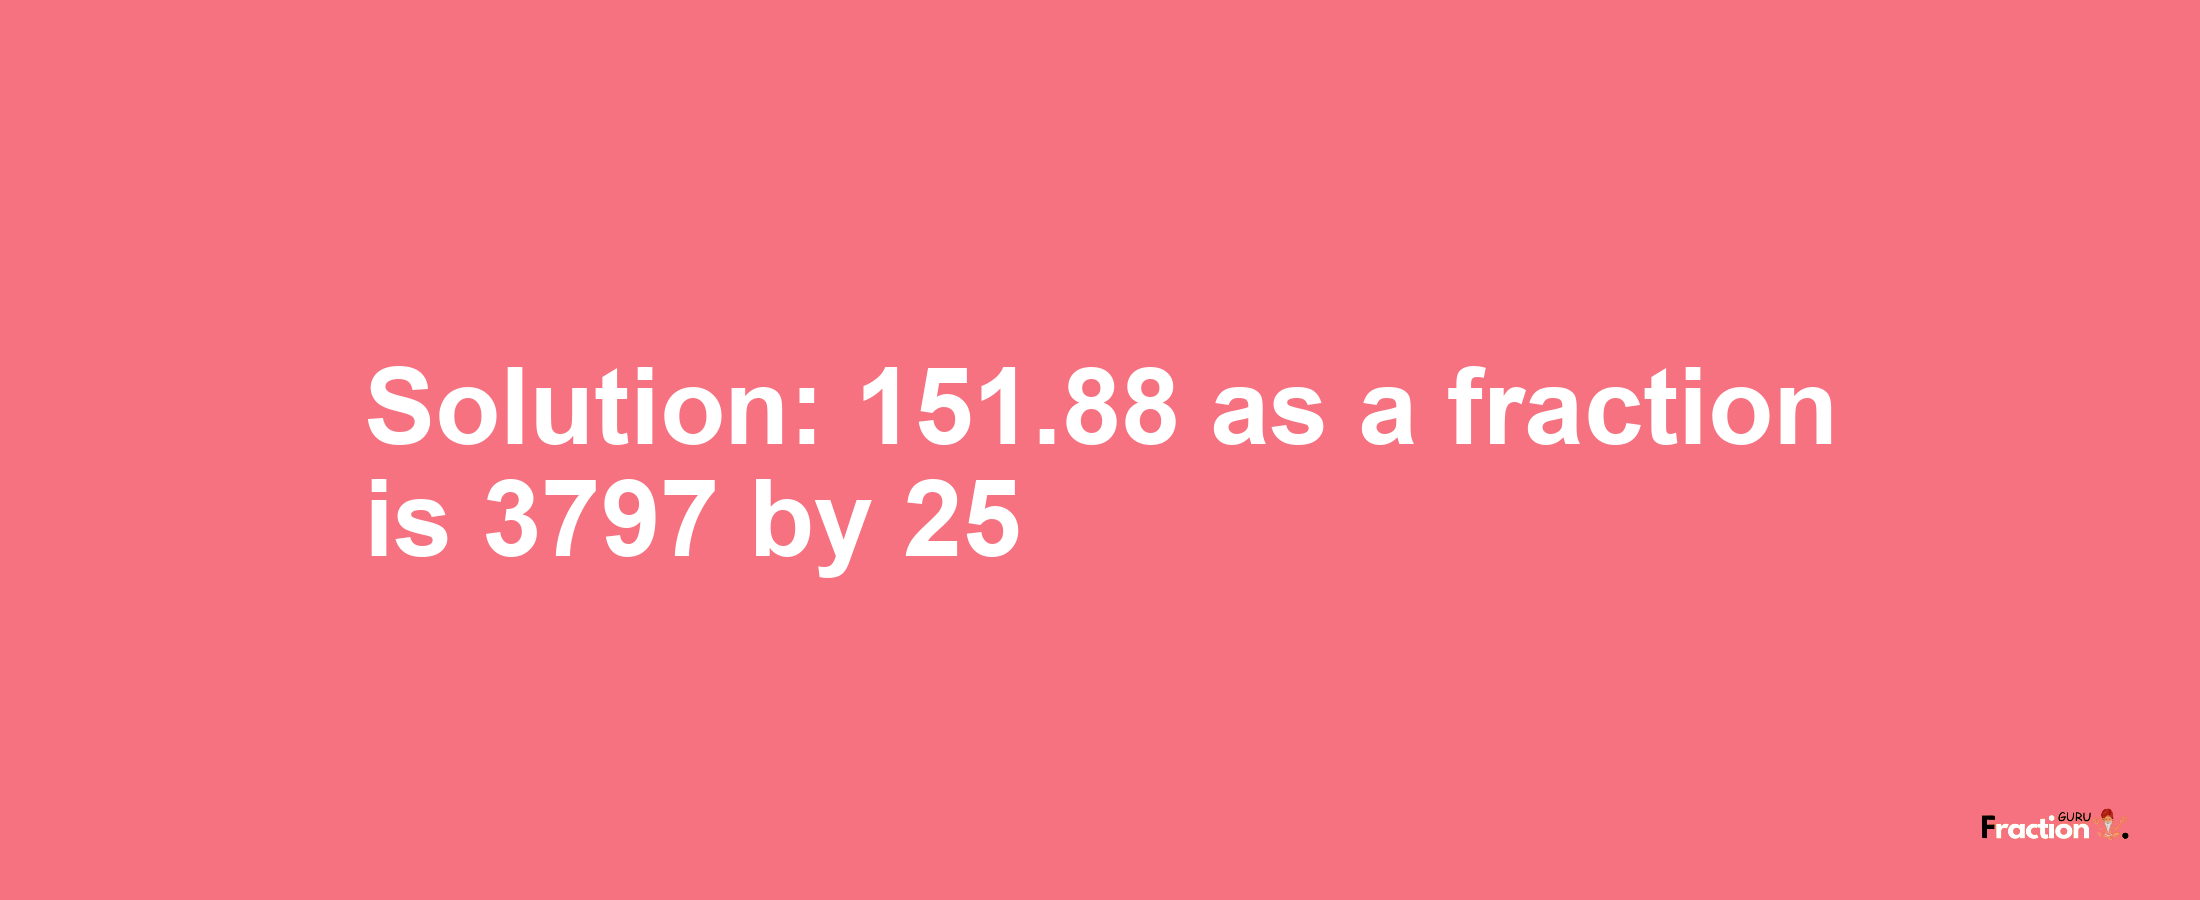 Solution:151.88 as a fraction is 3797/25